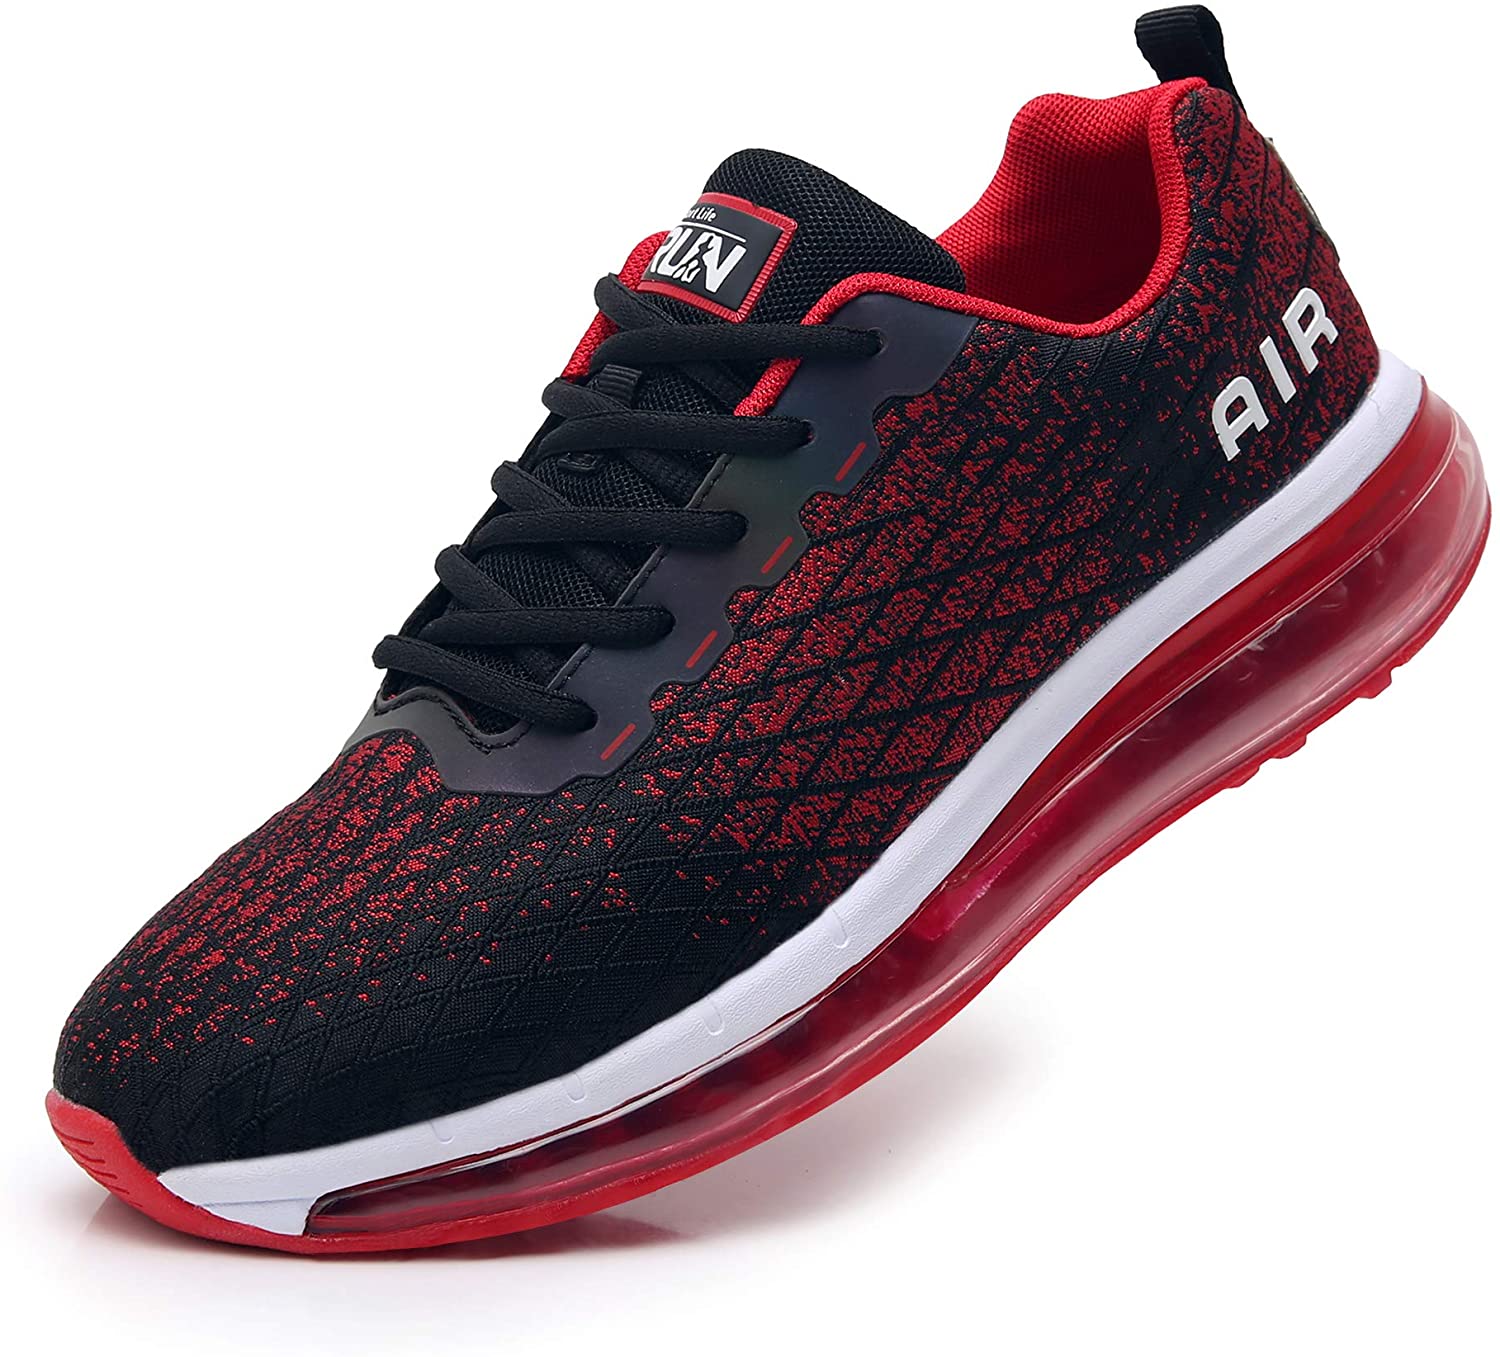 SuoKom Sneakers for Men Sport Running Shoes Athletic Tennis